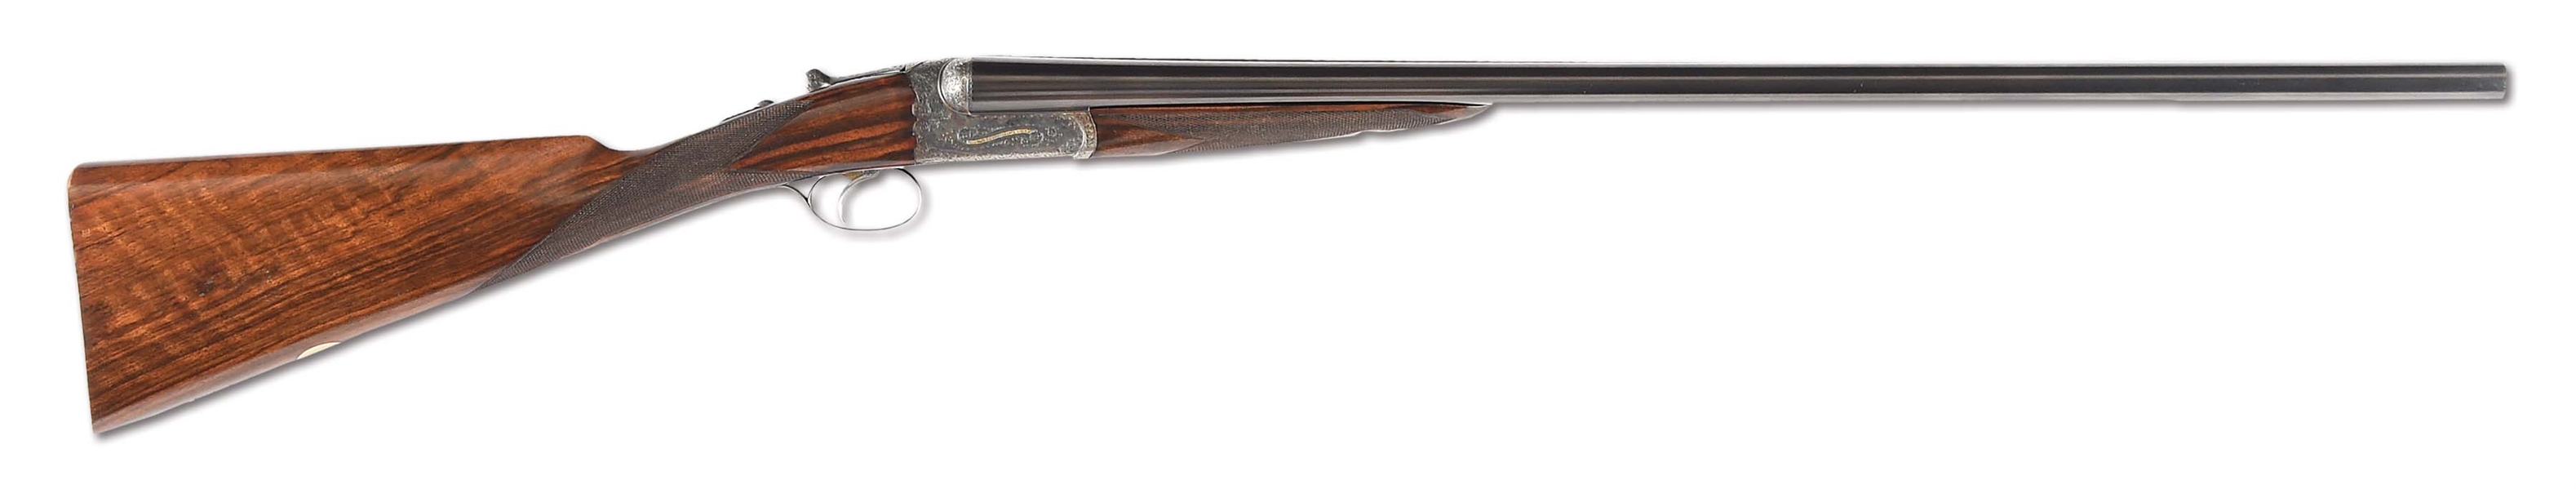 (C) BEST QUALITY WESTLEY RICHARDS HAND DETACHABLE LOCK, SINGLE TRIGGER EJECTOR GAME SHOTGUN WITH OAK AND LEATHER CASE.